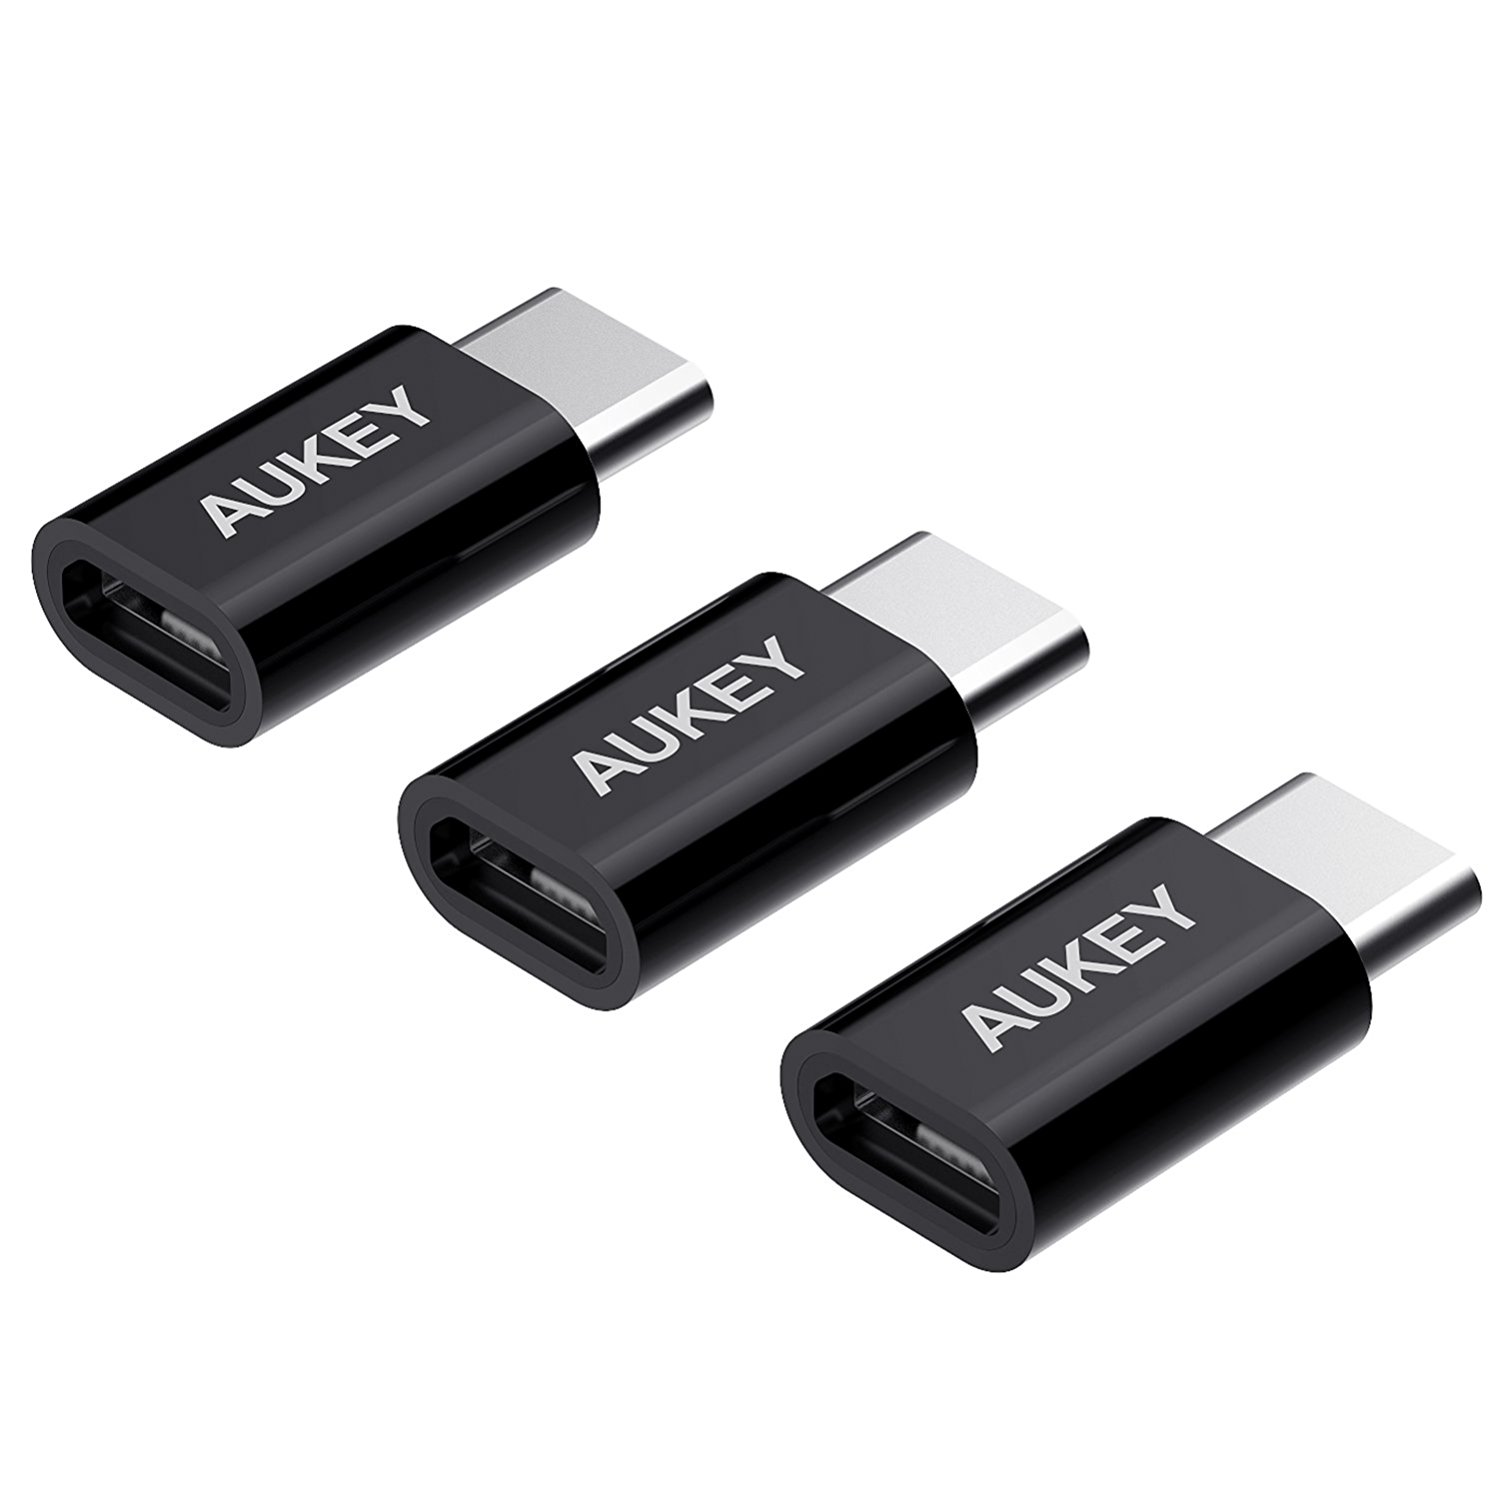 Aukey USB C to micro USB adapter 3-pack for $4 with code